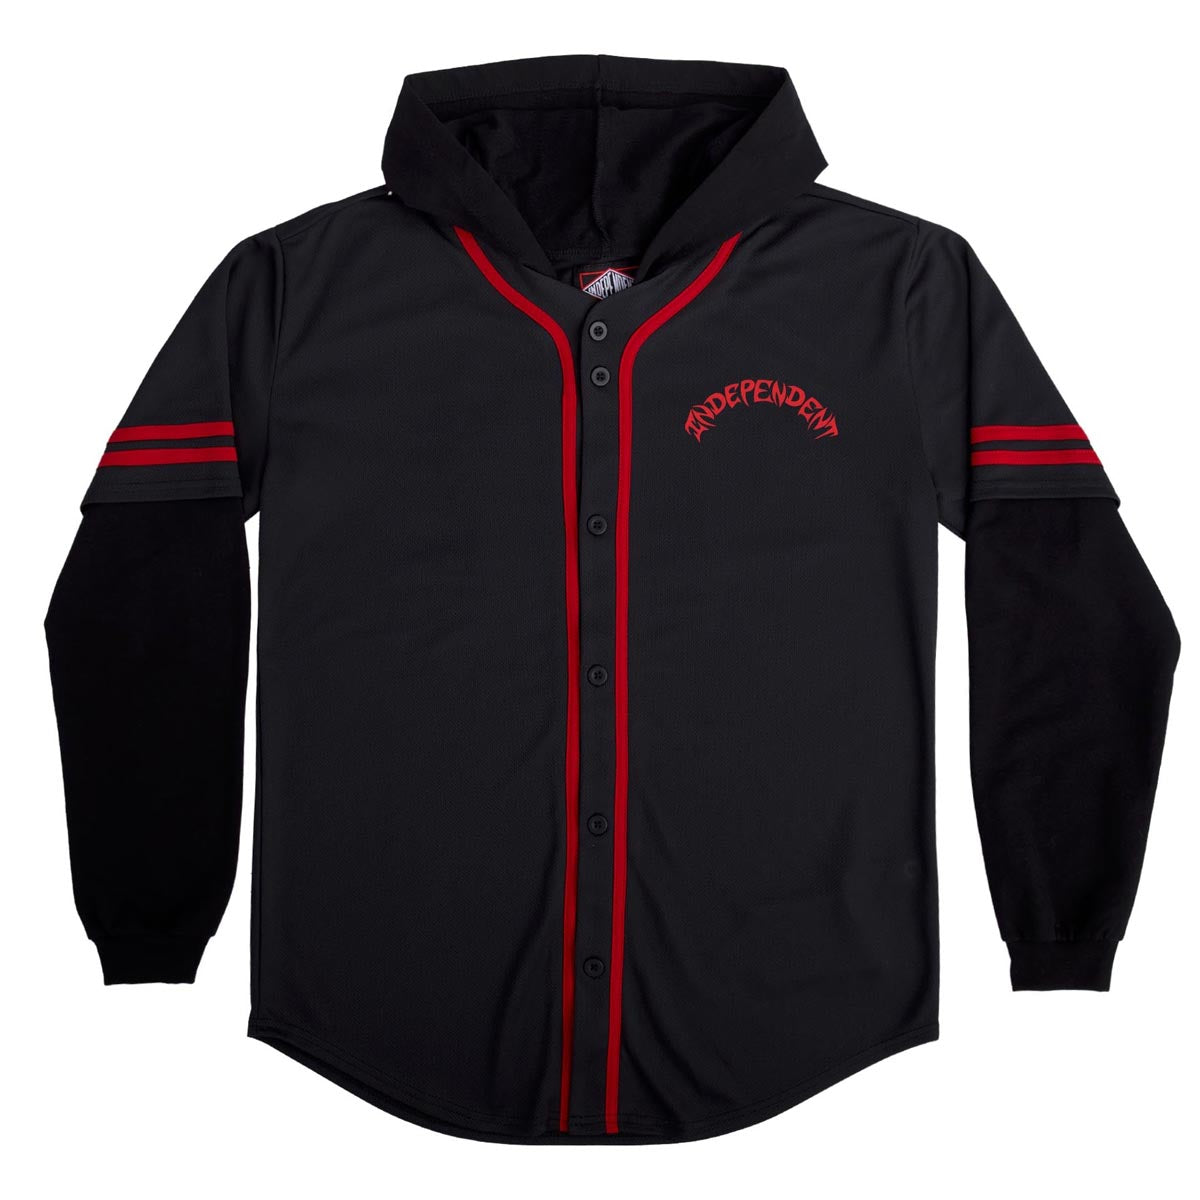 Independent Night Prowlers Long Sleeve Hooded Jersey - Black image 1